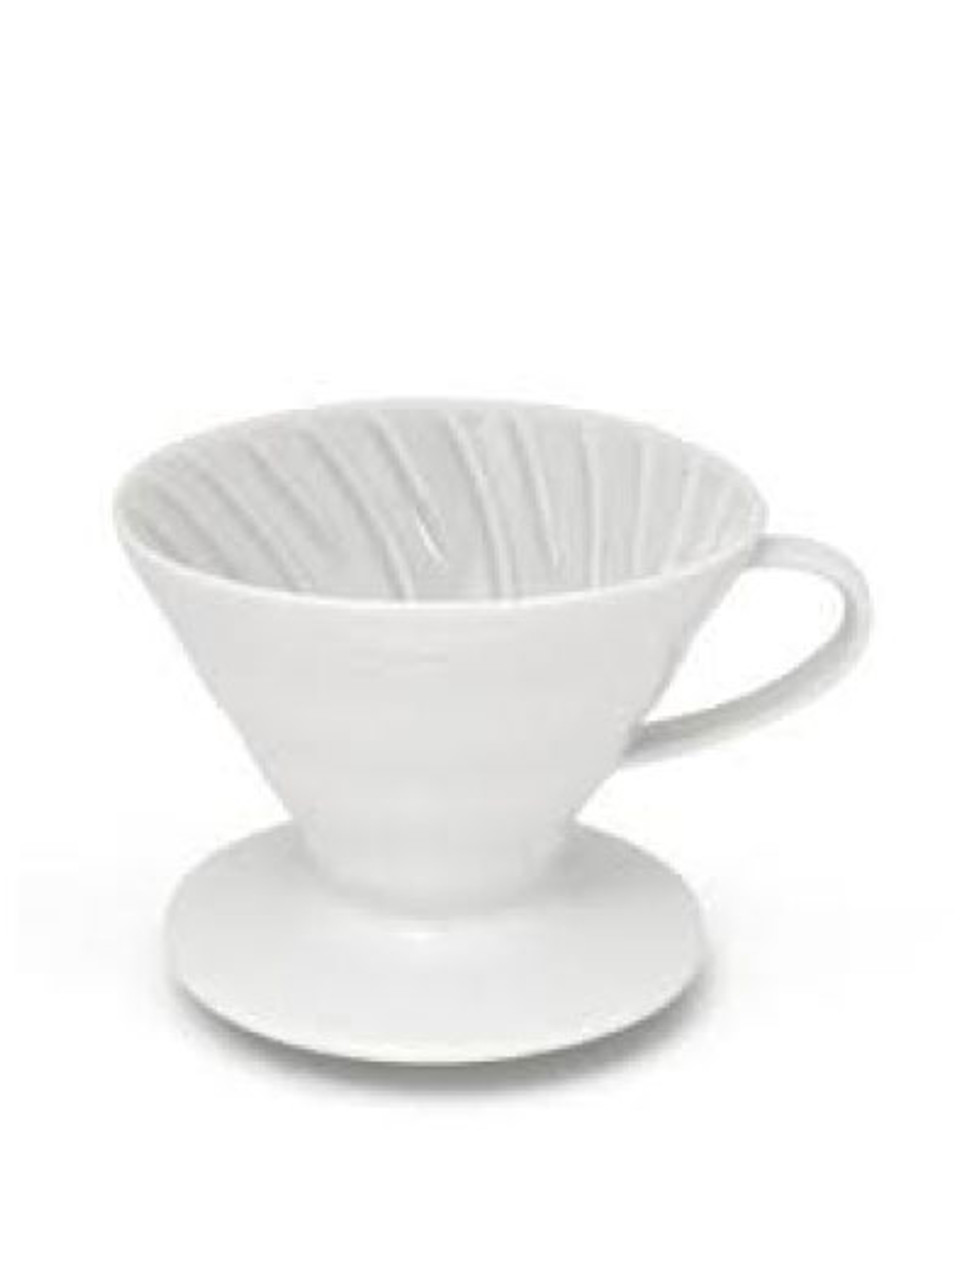 https://cdn11.bigcommerce.com/s-swnop9phre/images/stencil/1280x1280/products/433/507/Hario_Ceramic_Cone_-_2cup_-_white__12607.1671207395.jpg?c=2